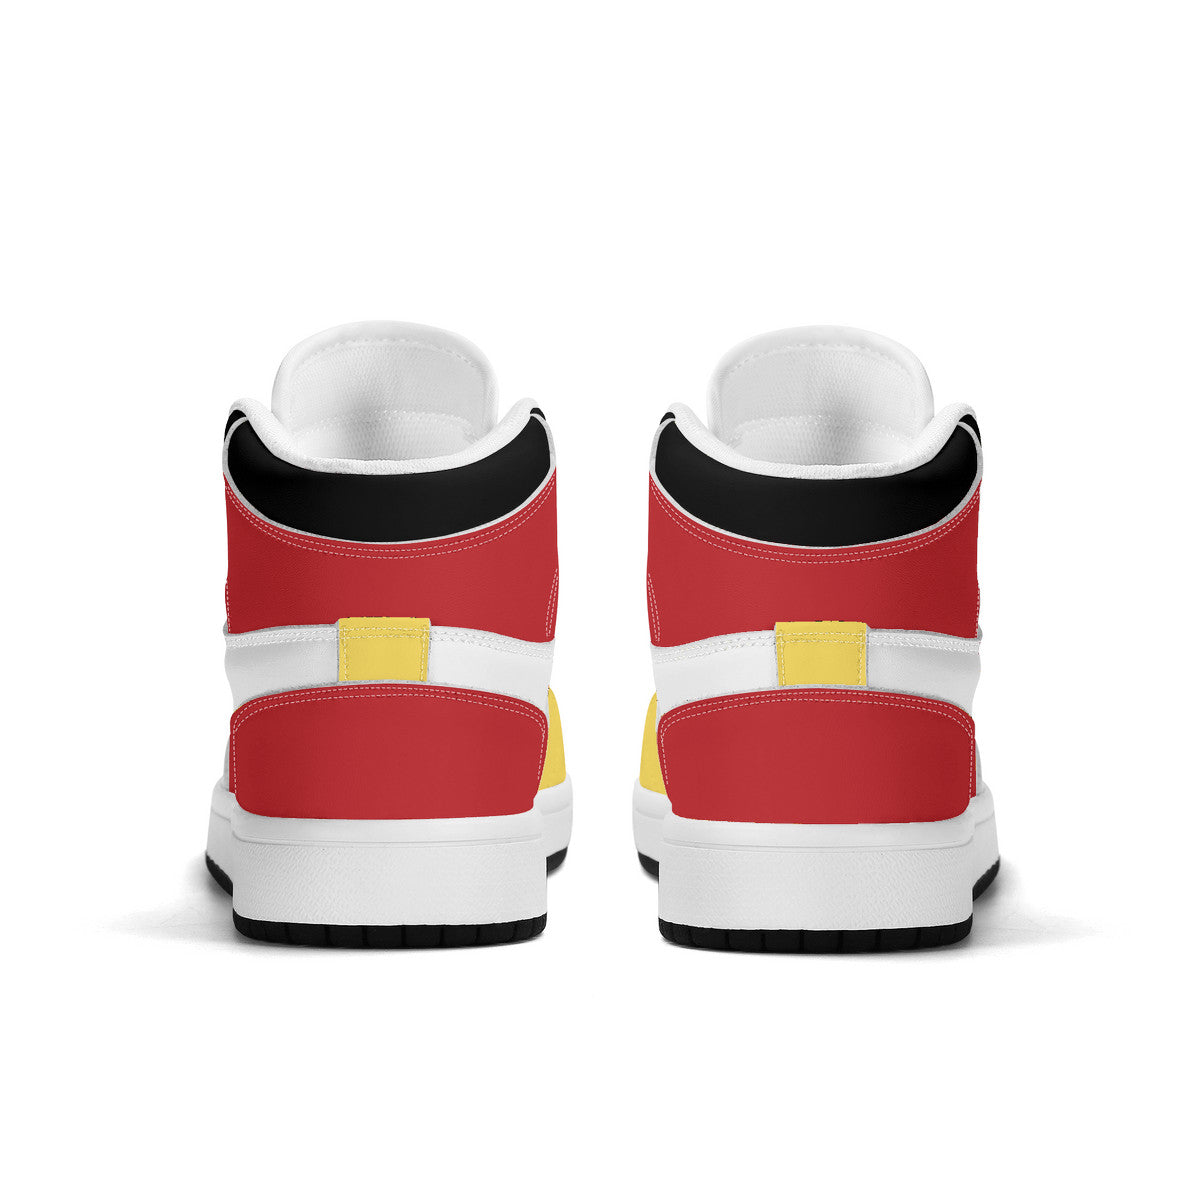 Customize Your Own Kids High-Top PU Leather Sneakers